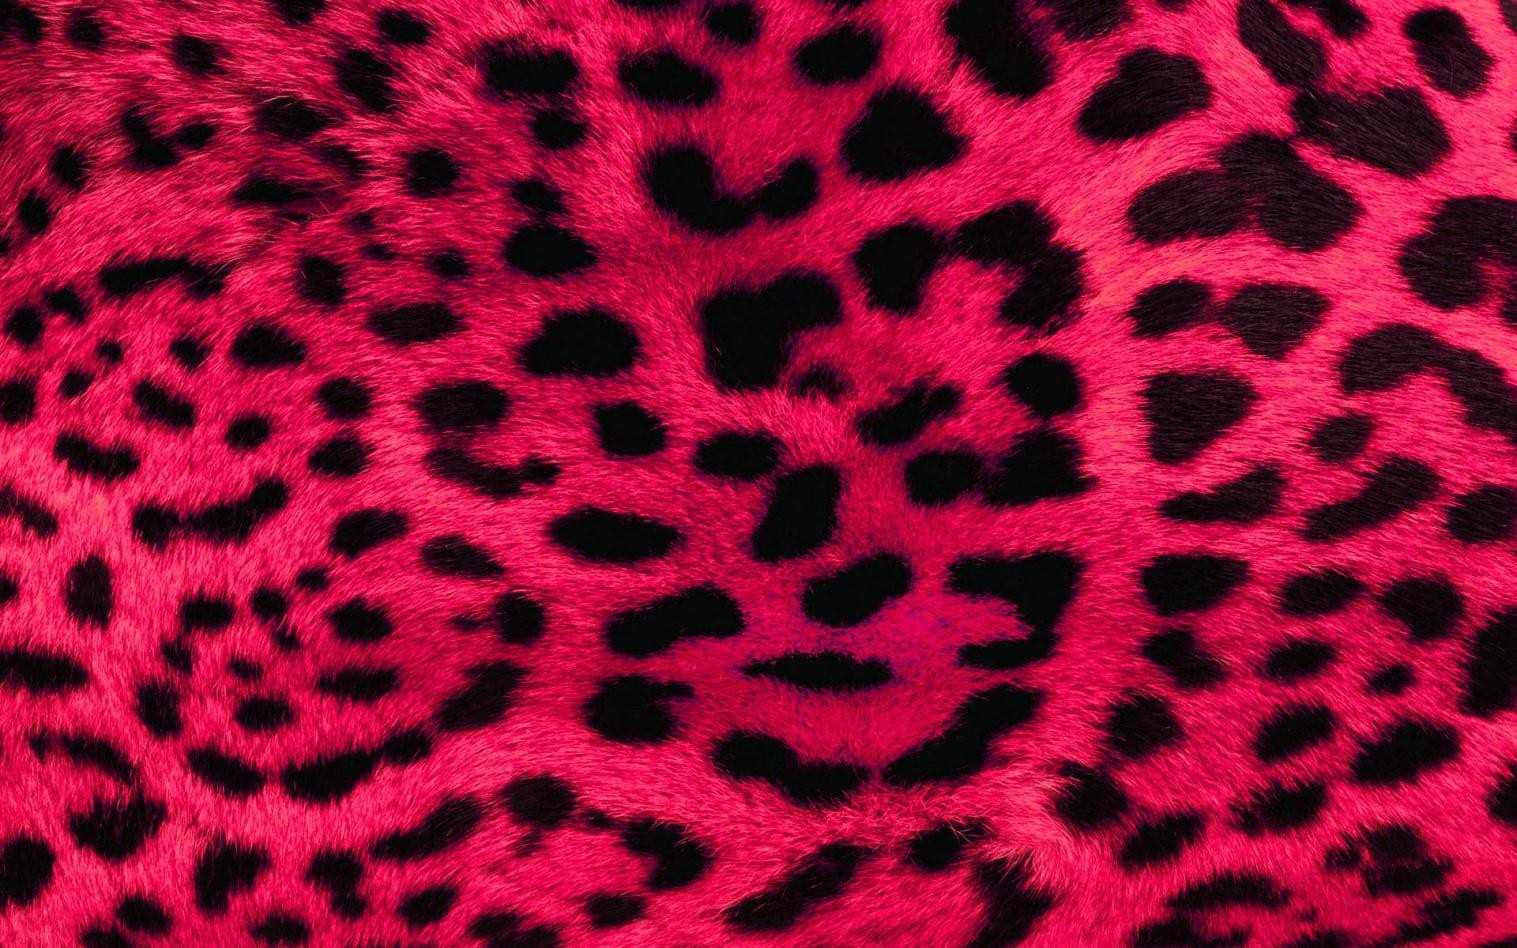 Embrace your wild side with a bold animal print background!